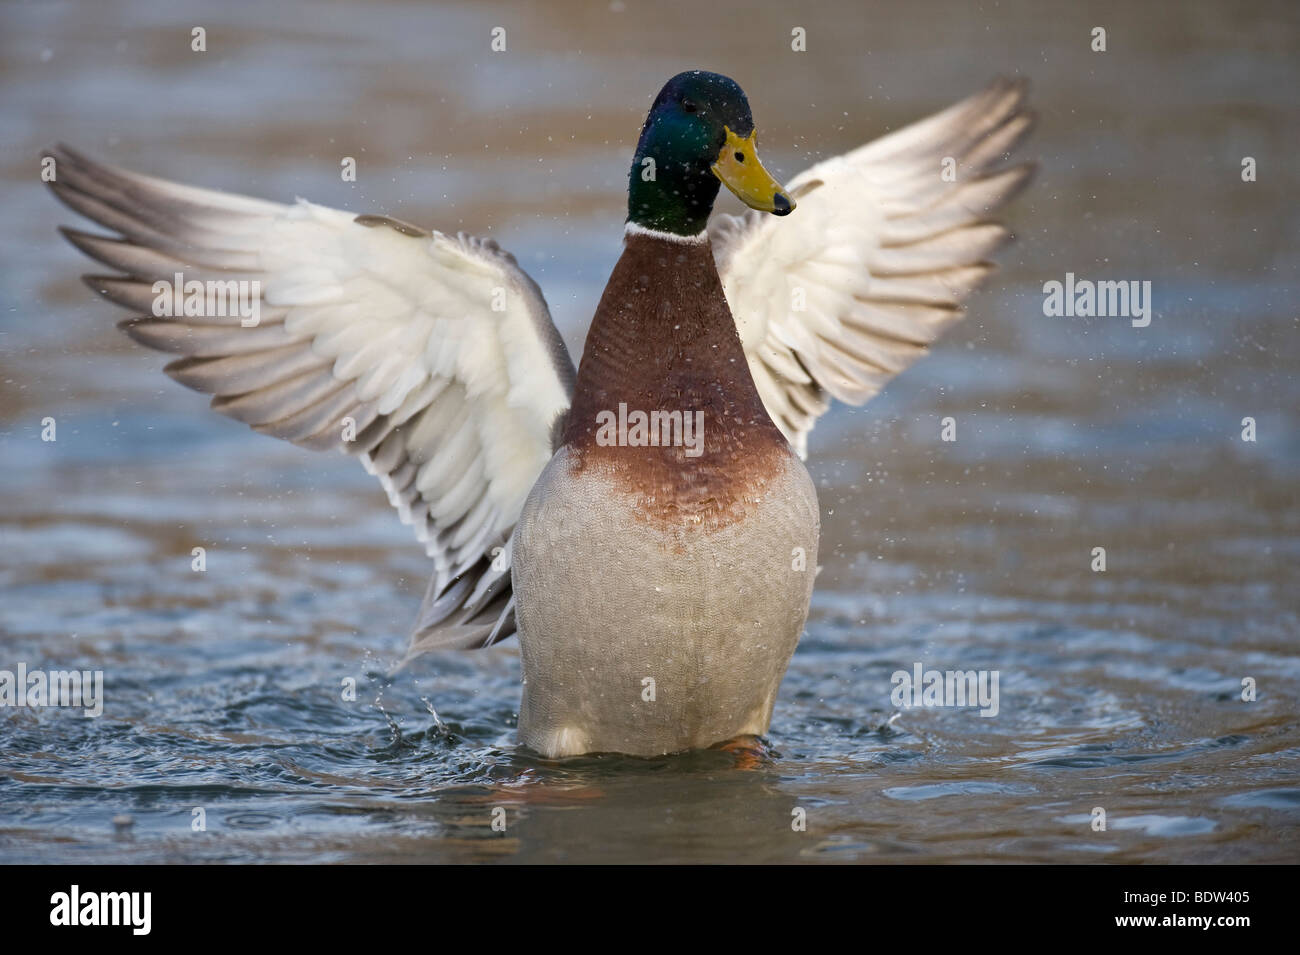 A dabbling duck beating its wings Stock Photo